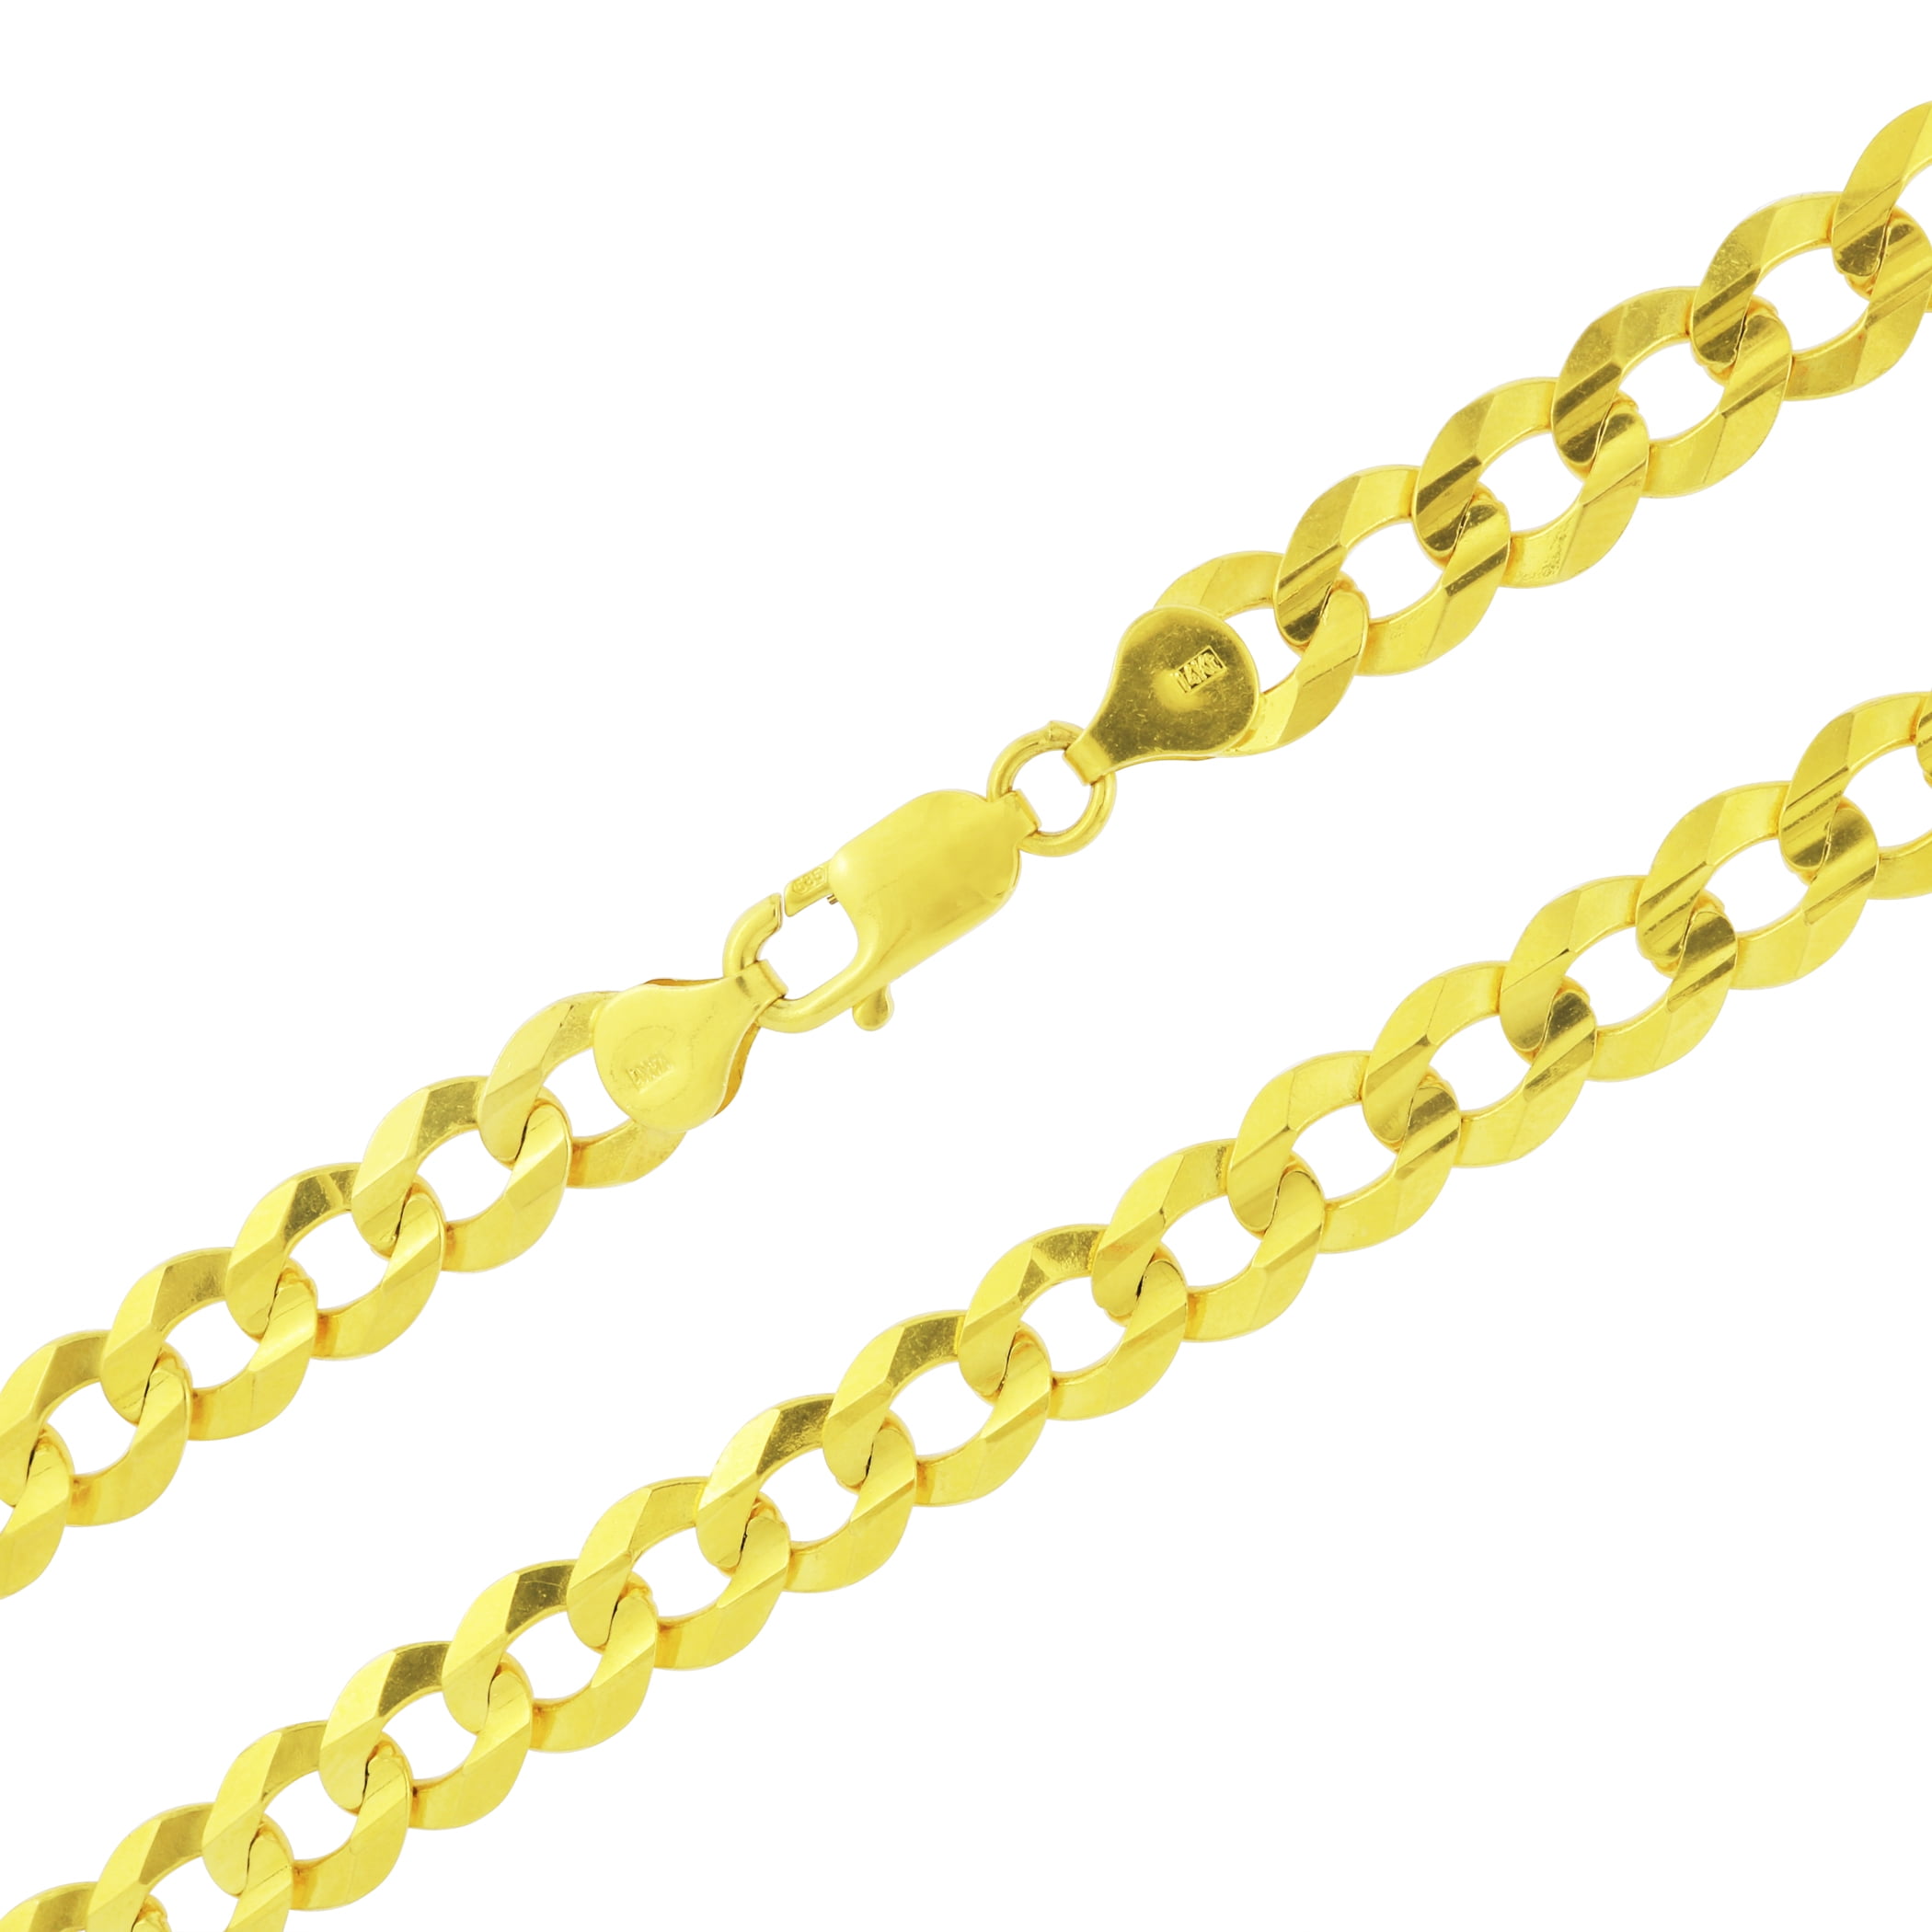 Cuban Curb 10K Yellow Gold 2.5mm Chain Necklace Lobster Clasp 